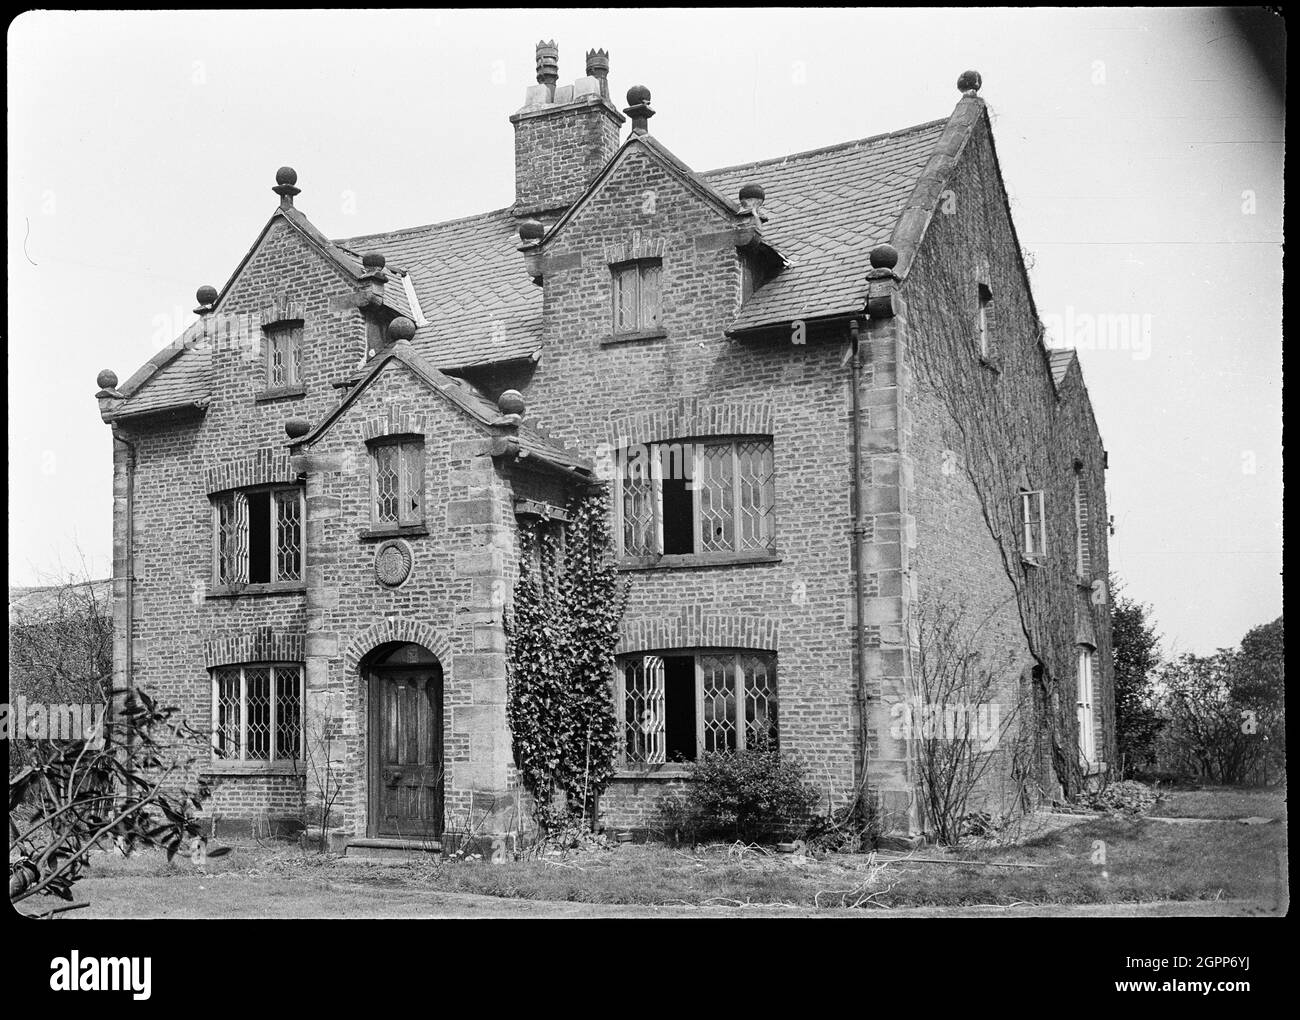 Knobb Hall, Manchester, 1942. An exterior view of Knobb Hall, showing the front facade. The hall was built in the c17th century, and was demolished post 1942. The front facade has three bays and two storeys, with attics in the two end gables. The porch was two storeys and projecting, with a gabled roof. The gables throughout the hall has ball finials on each corner. Stock Photo